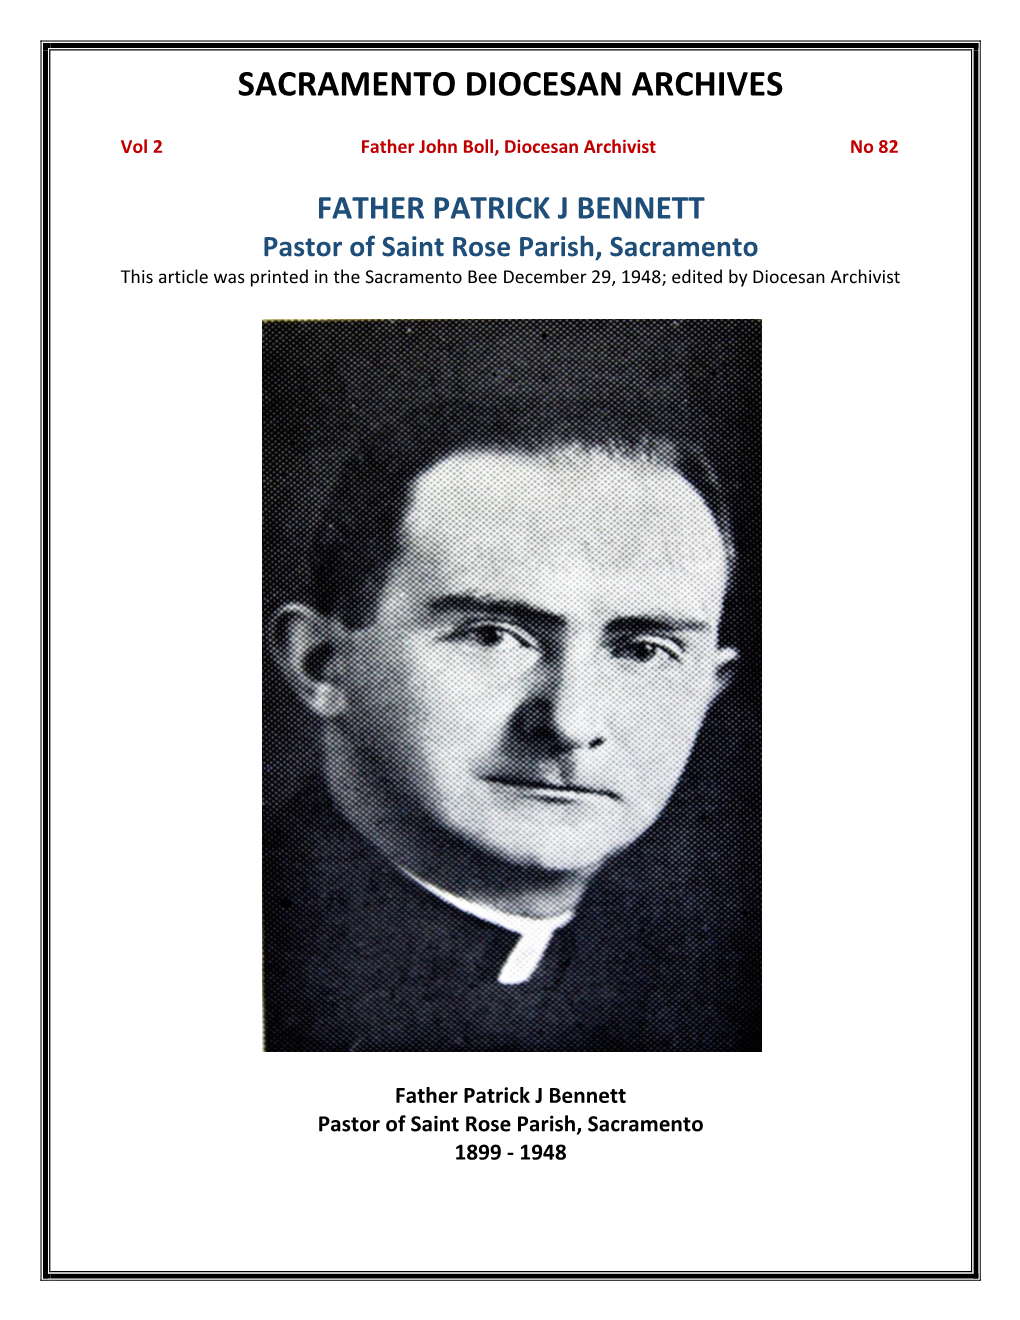 FATHER PATRICK J BENNETT Pastor of Saint Rose Parish, Sacramento This Article Was Printed in the Sacramento Bee December 29, 1948; Edited by Diocesan Archivist